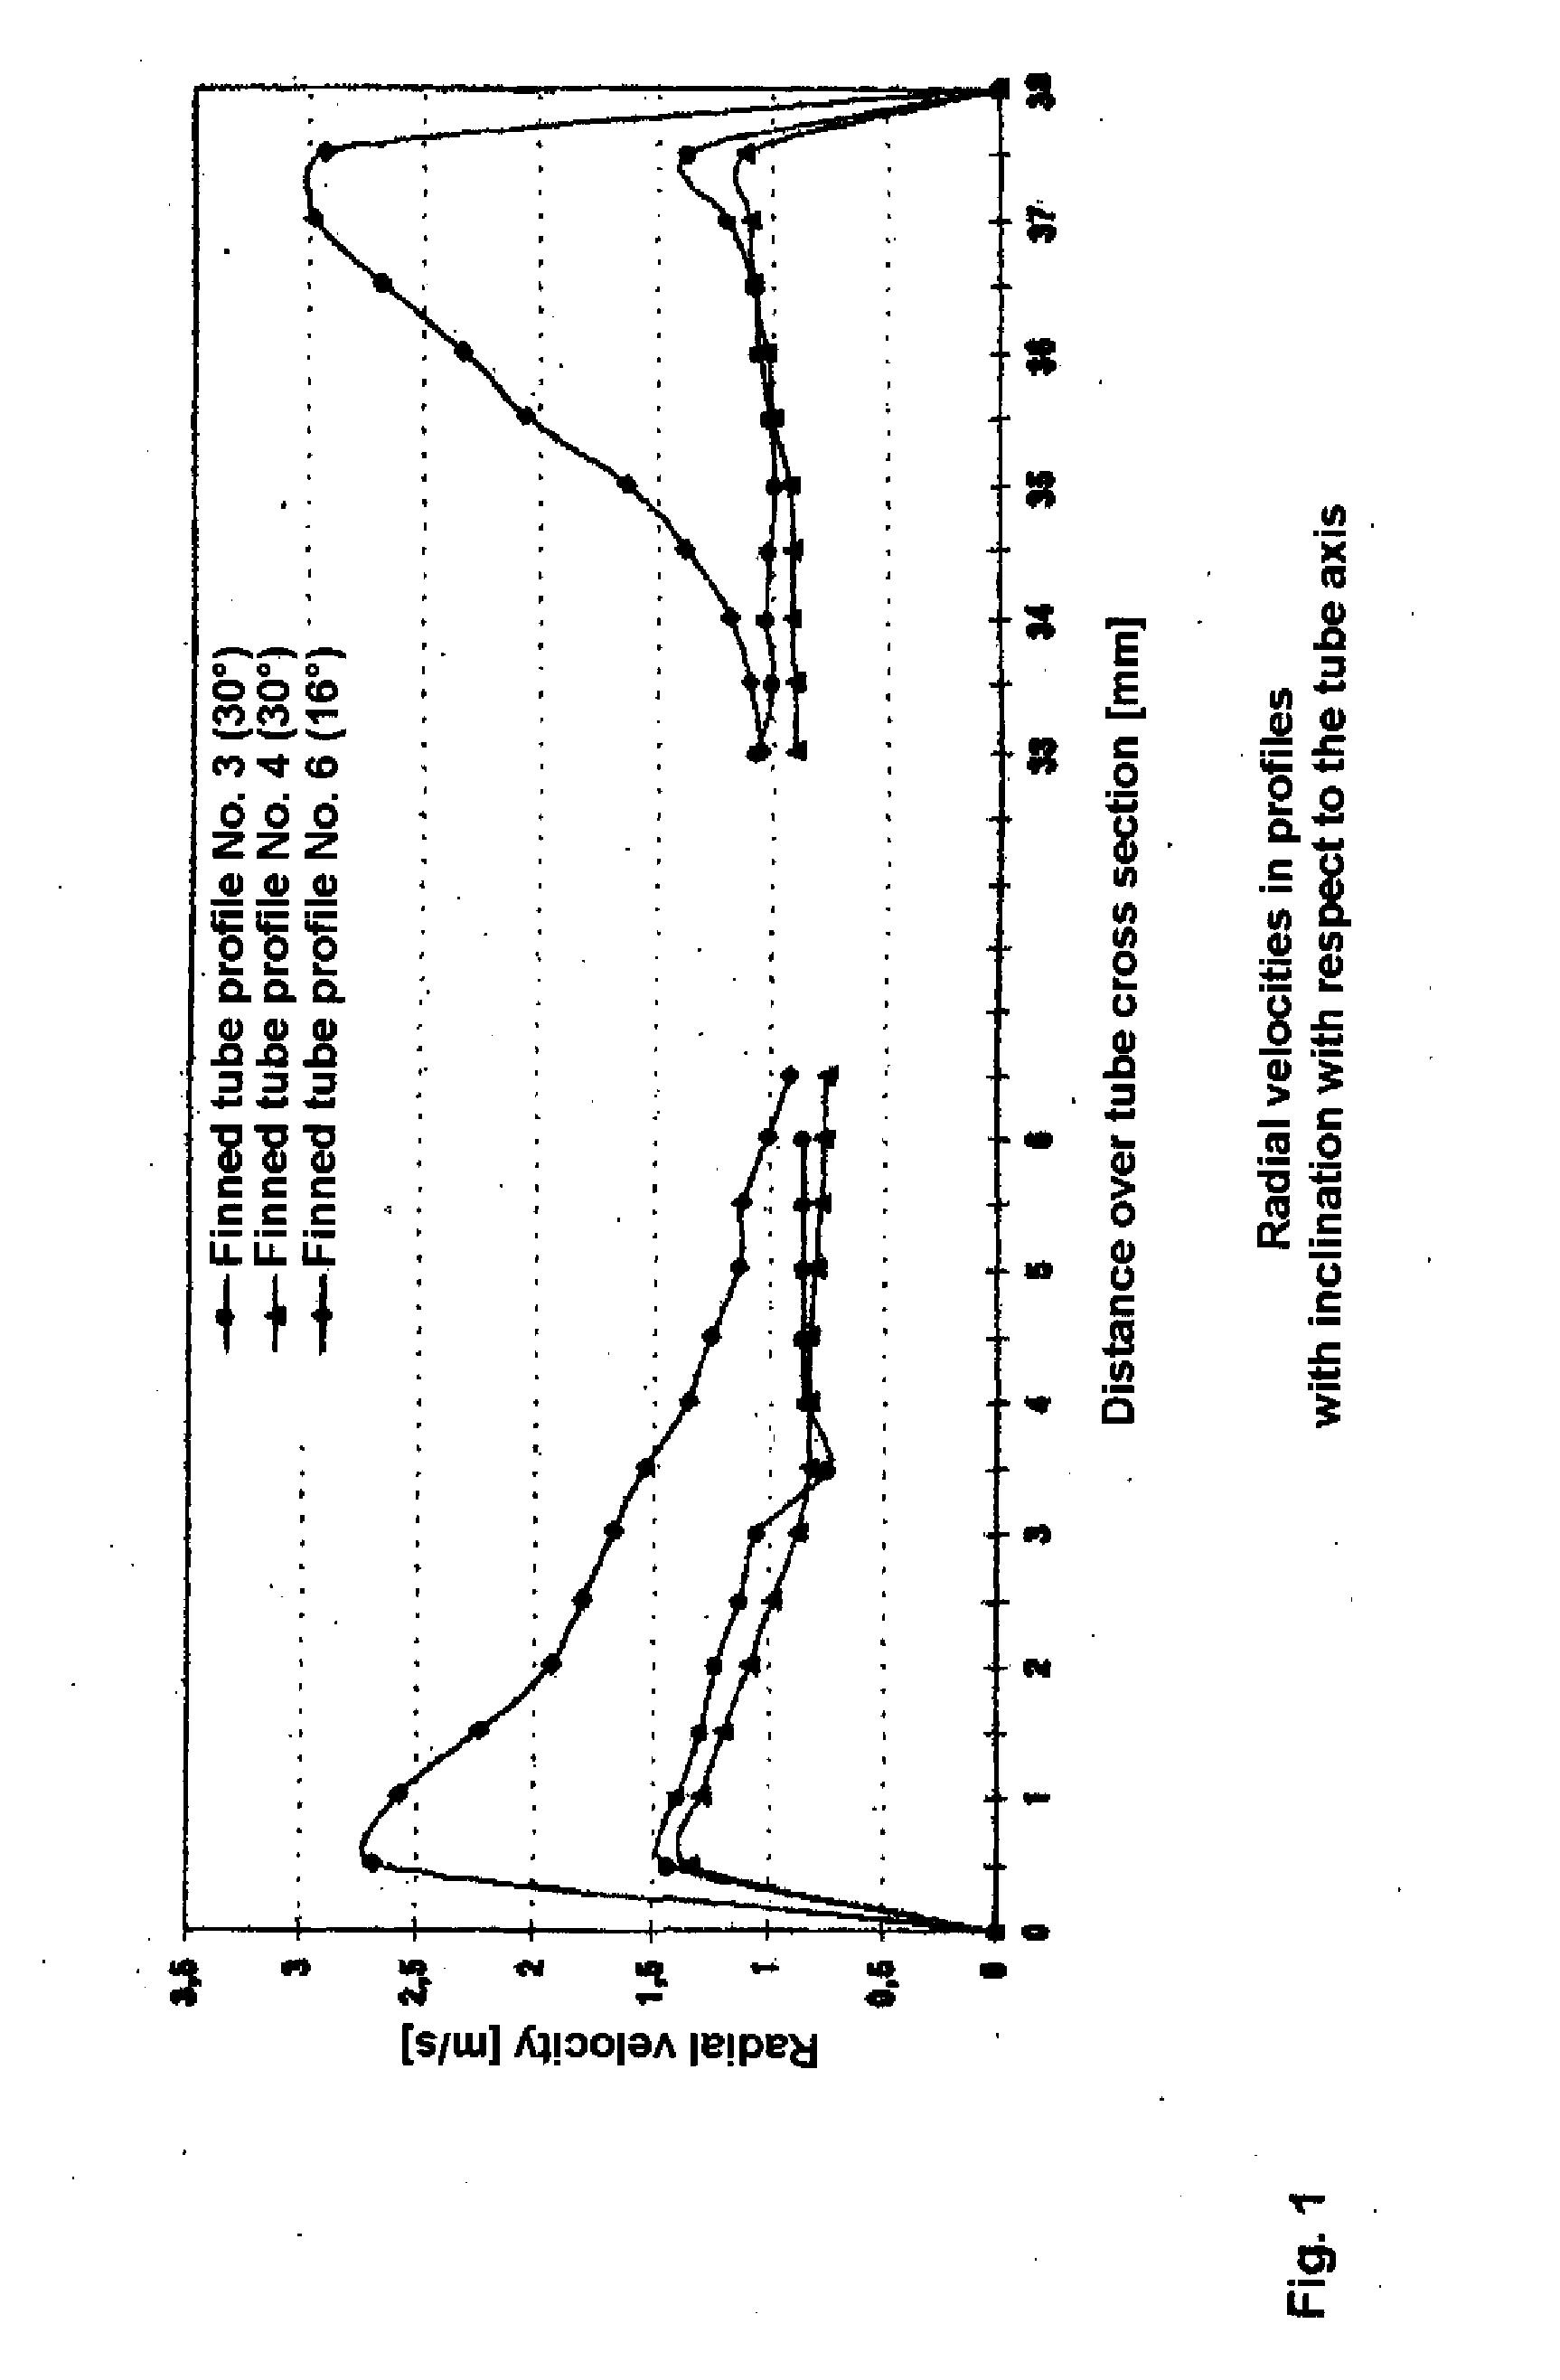 Composite tube, method of producing for a composite tube, and use of a composite tube